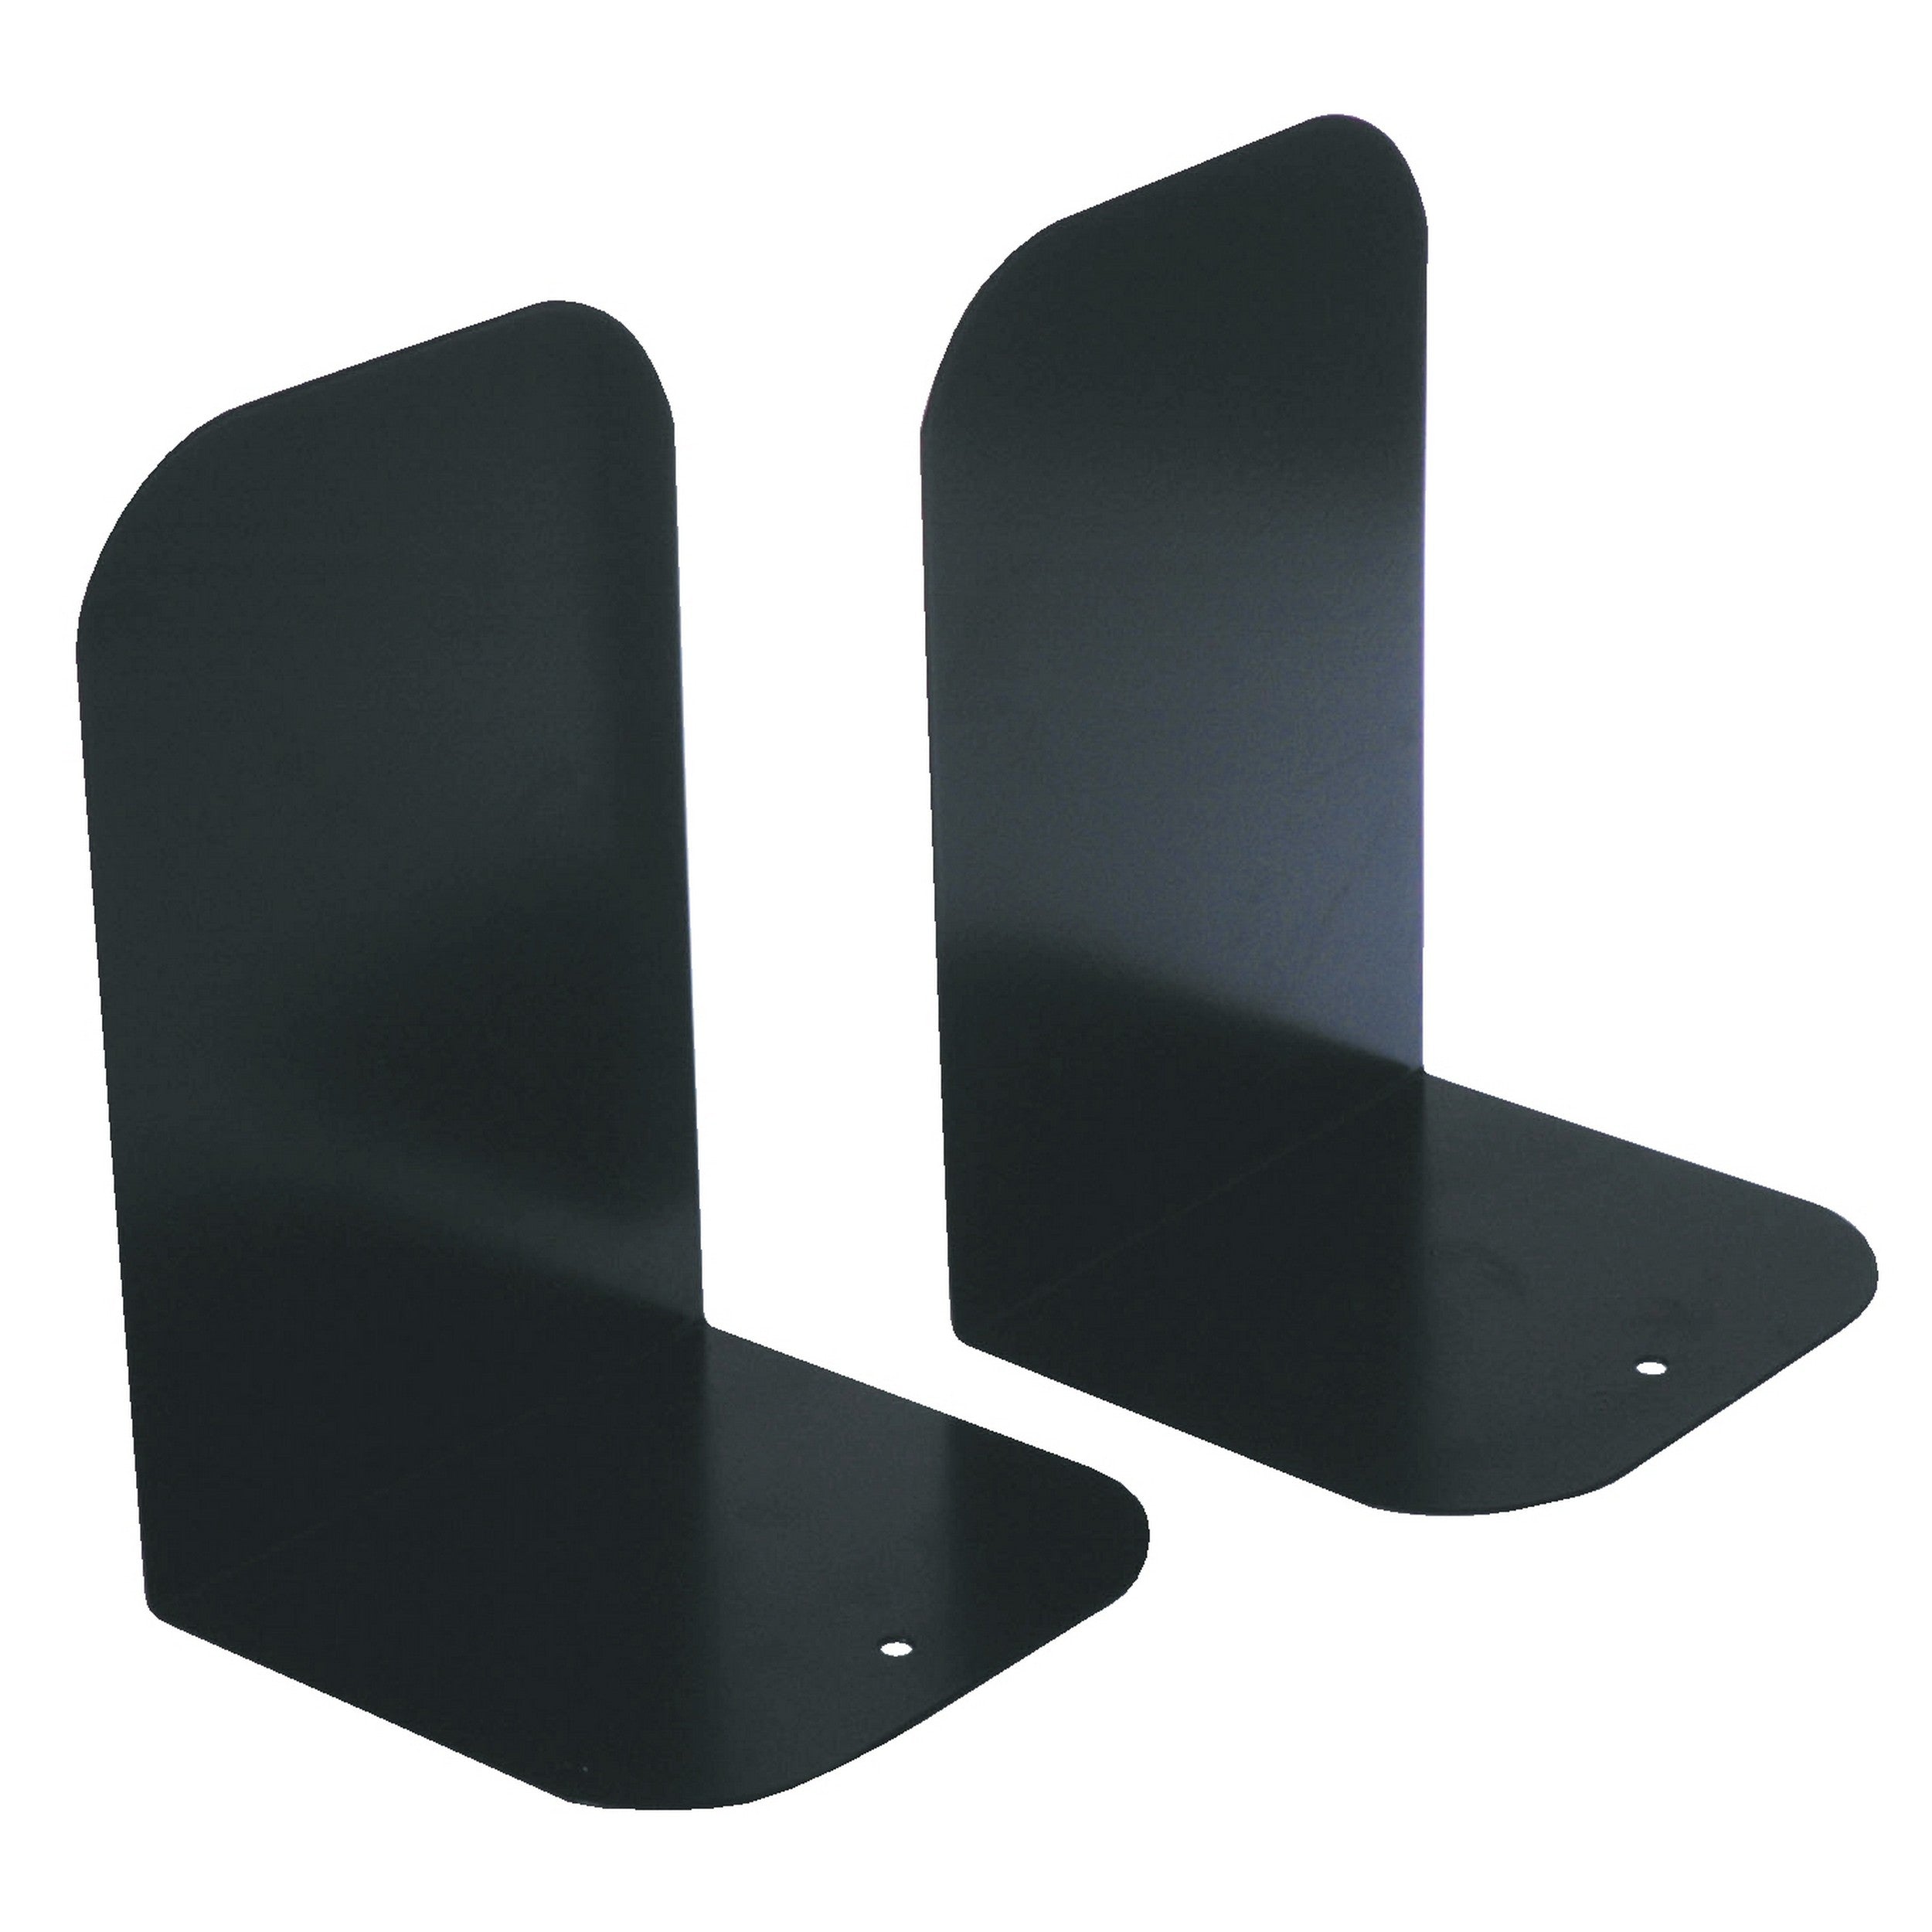 A pair of black metal bookends